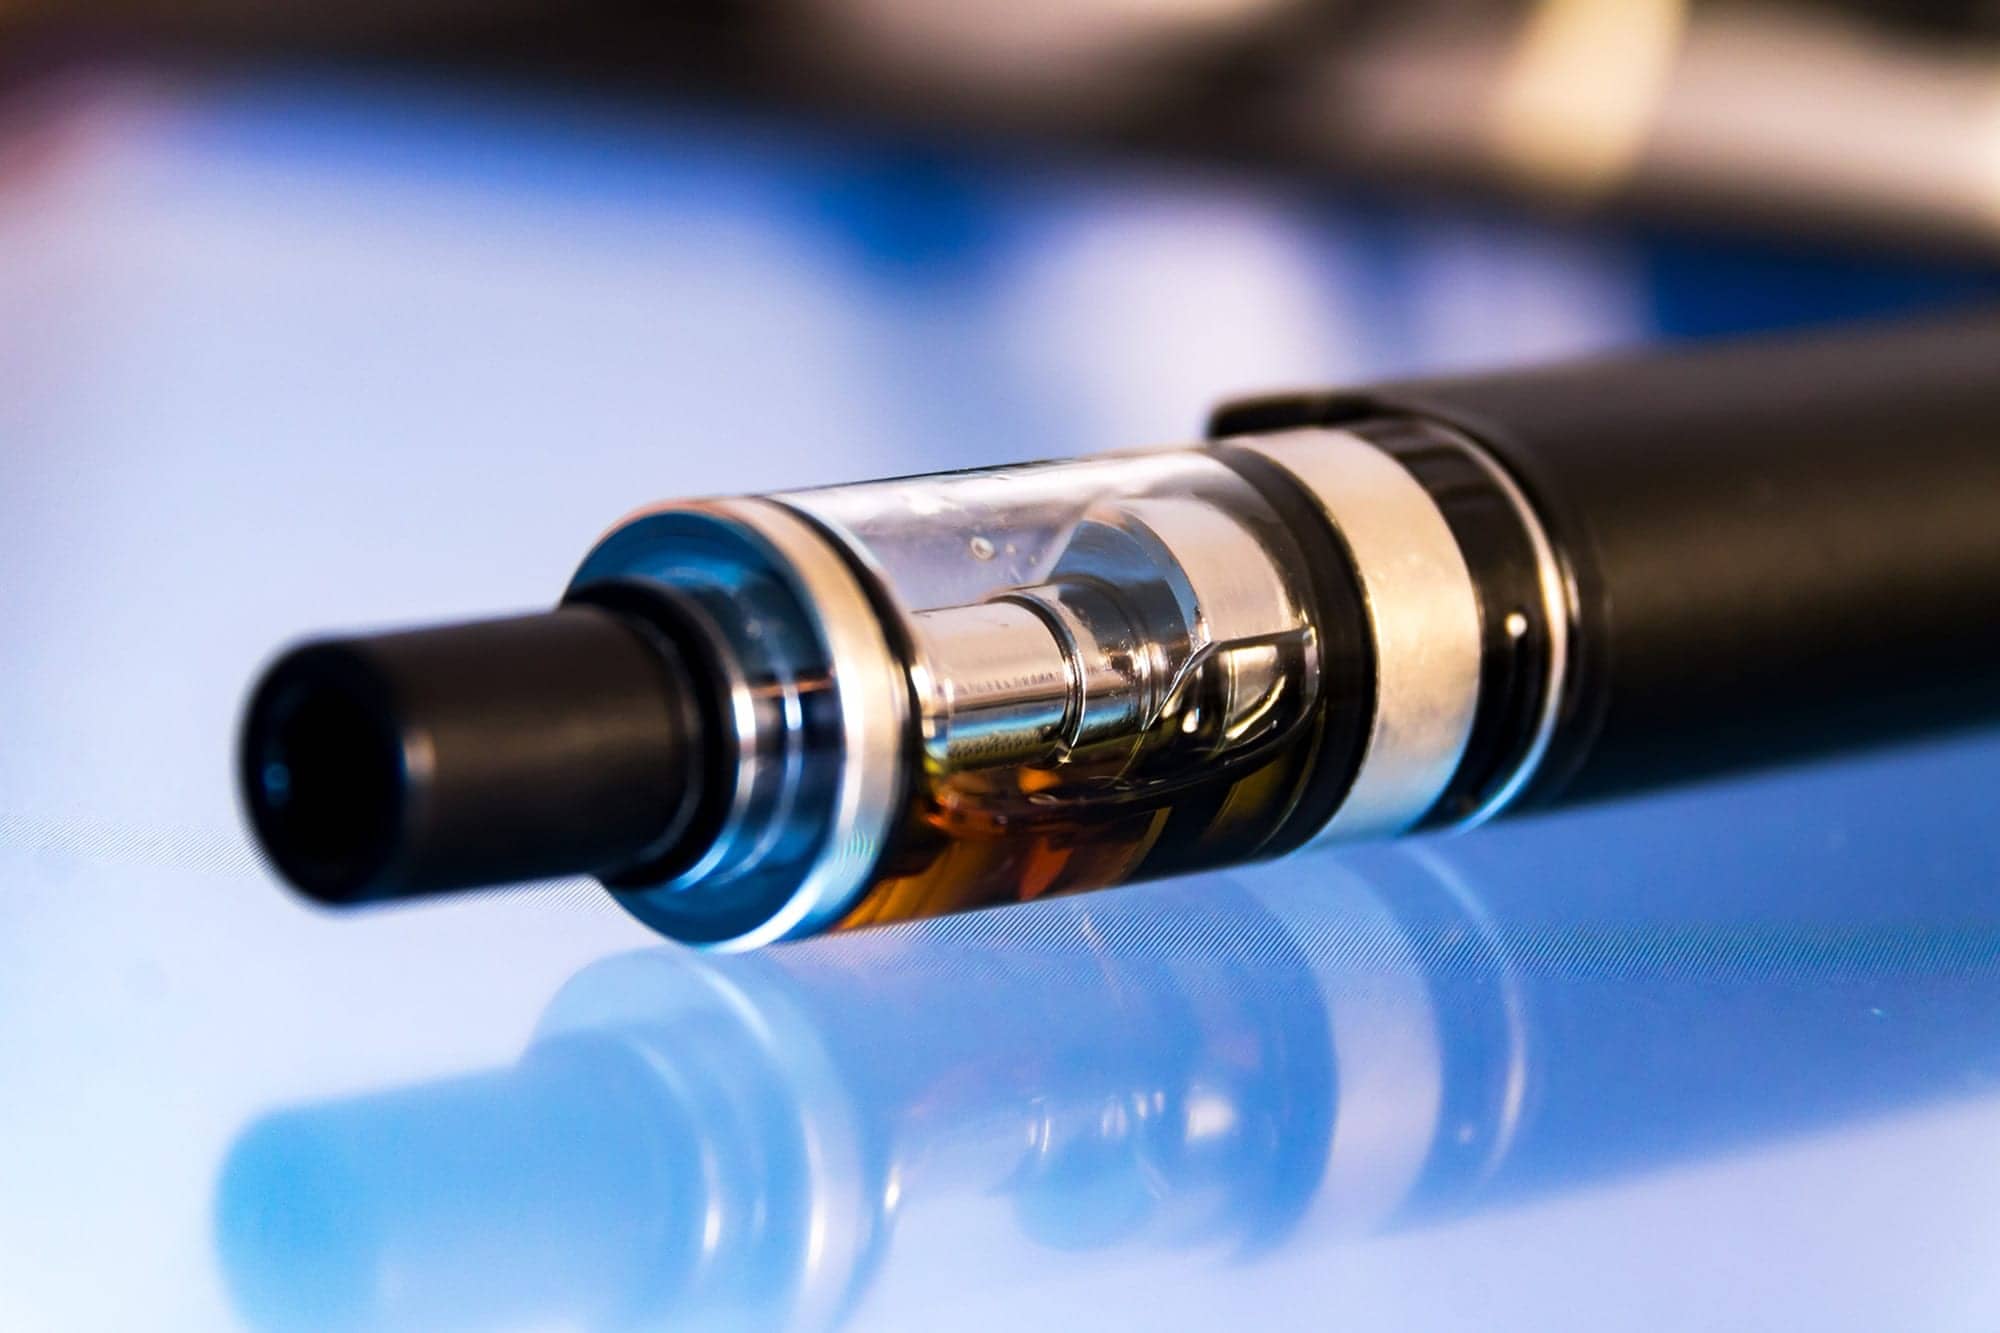 Chronic Inhalation of E-cigarette Vapor Negatively Affects Lungs